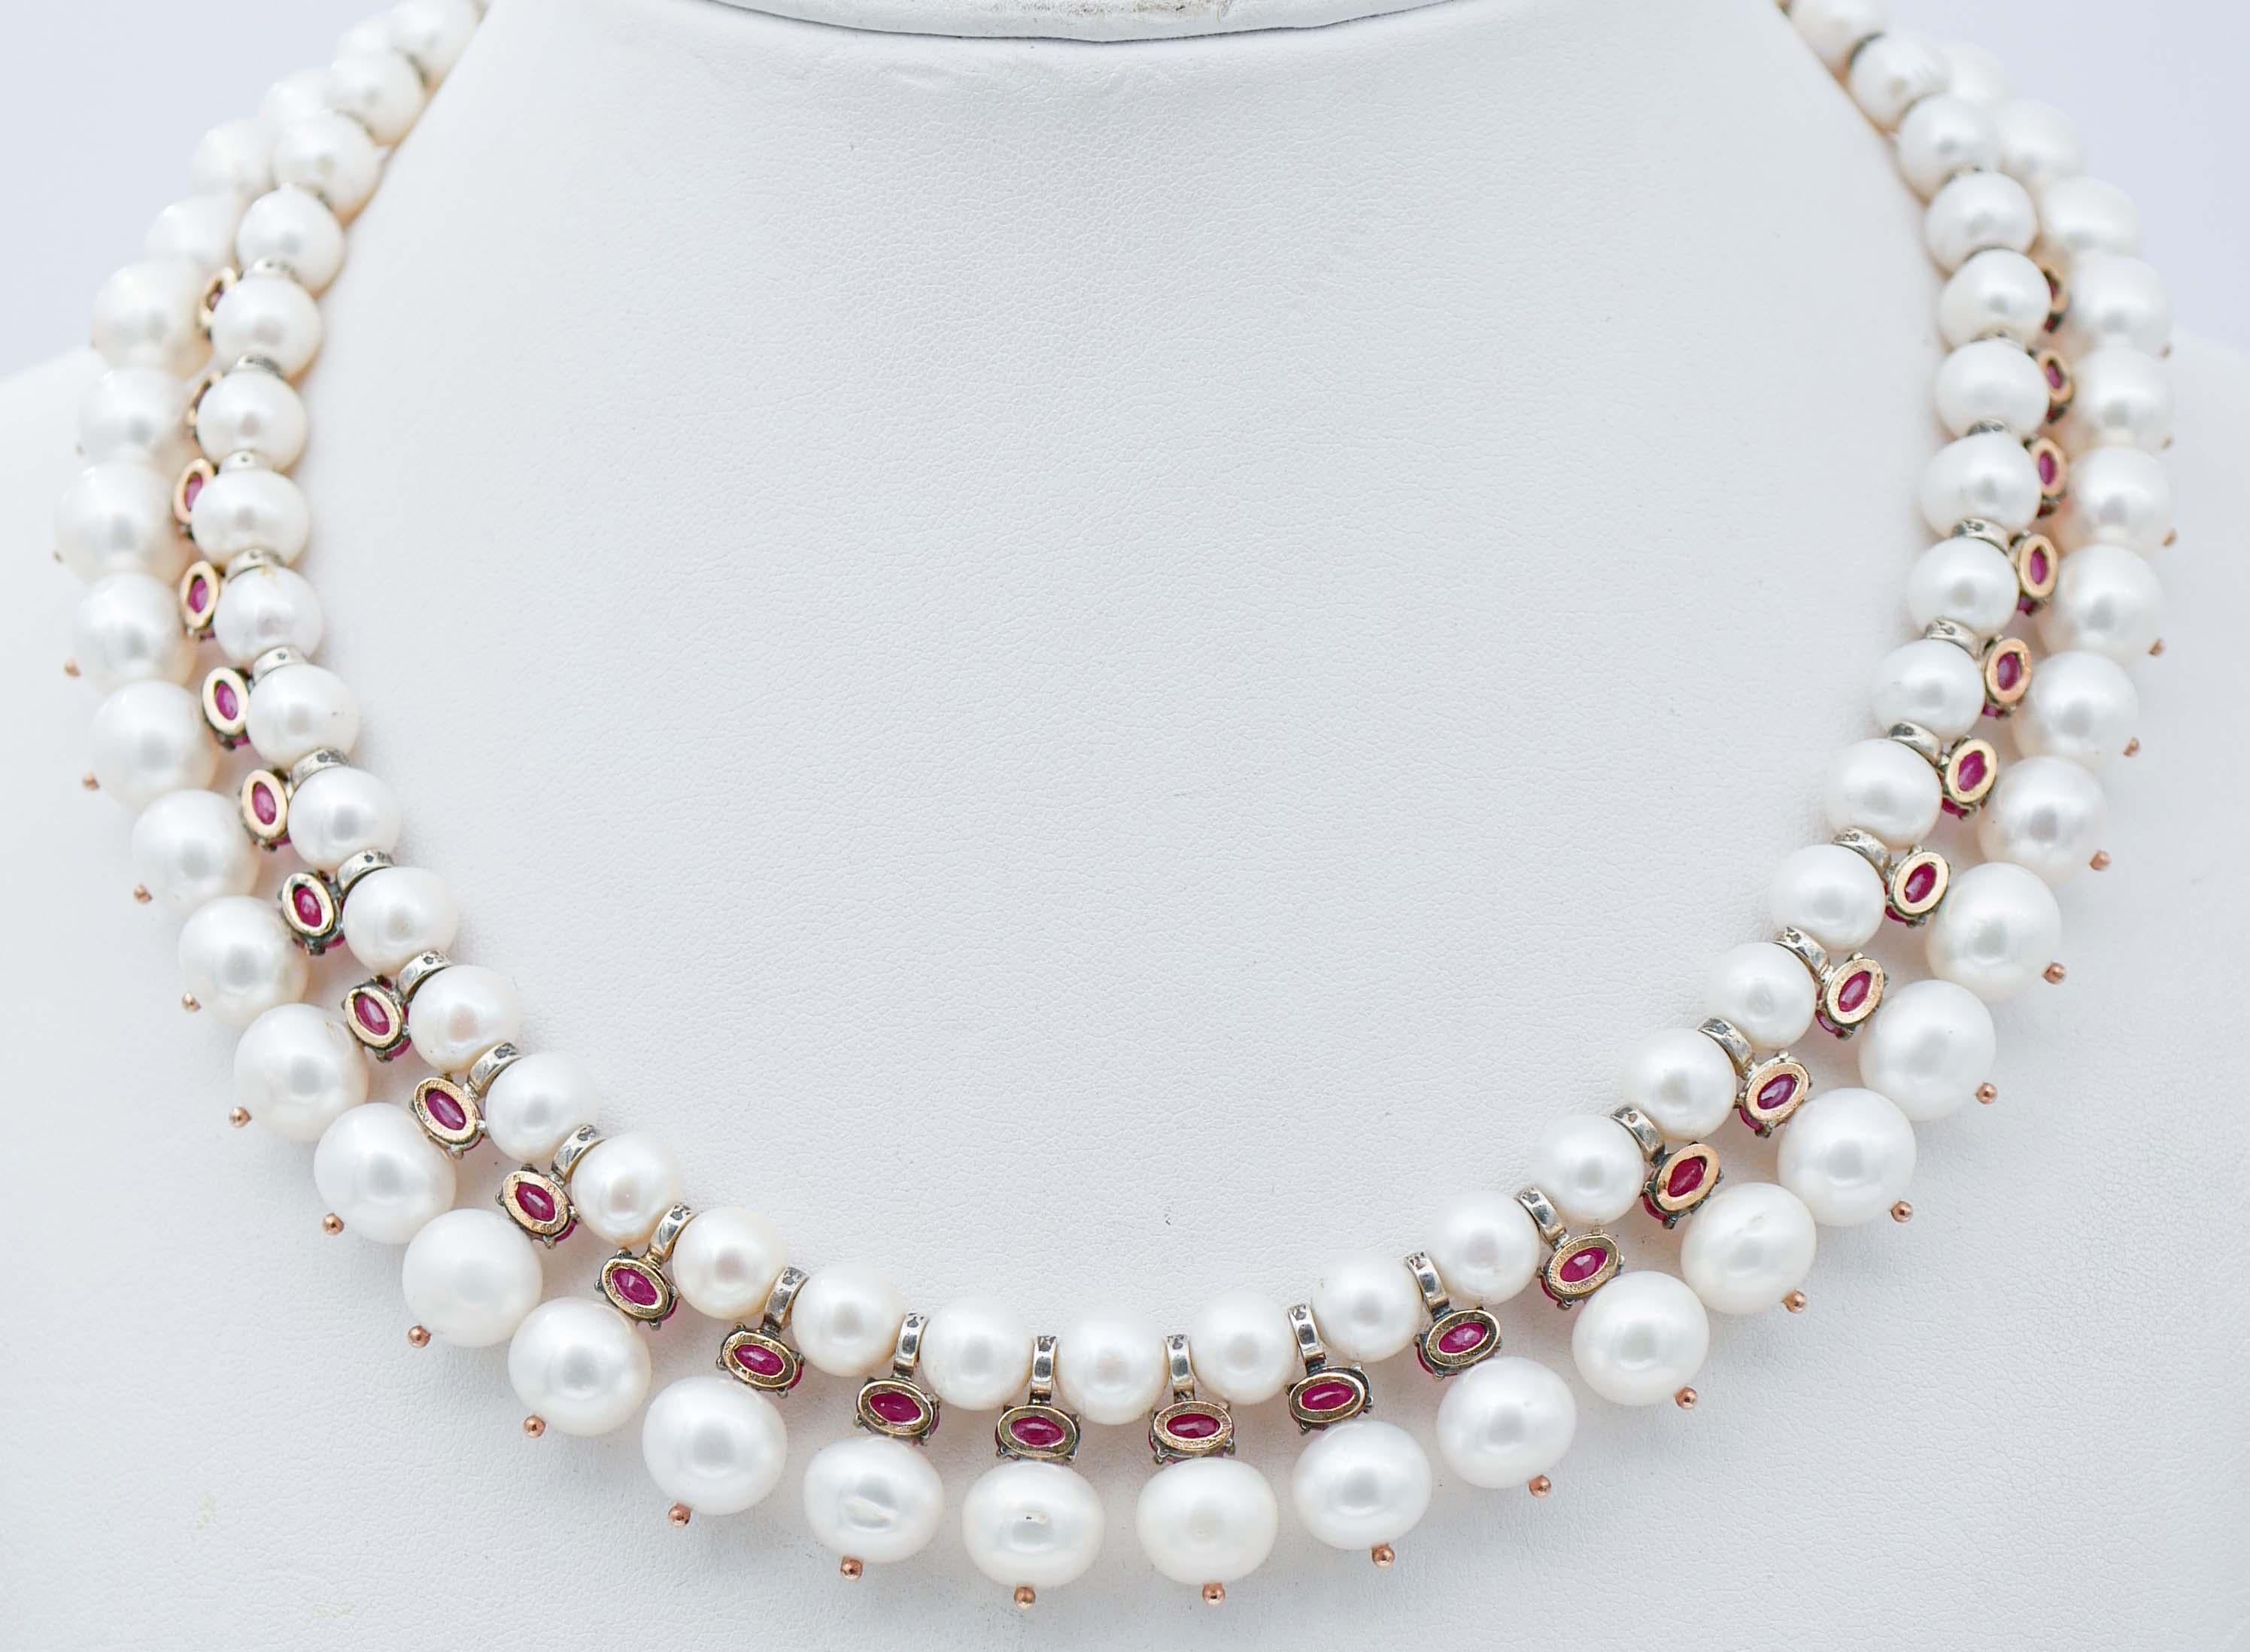 Retro Diamonds, Rubies, White Pearls, Rose Gold and Silver Retrò Necklace